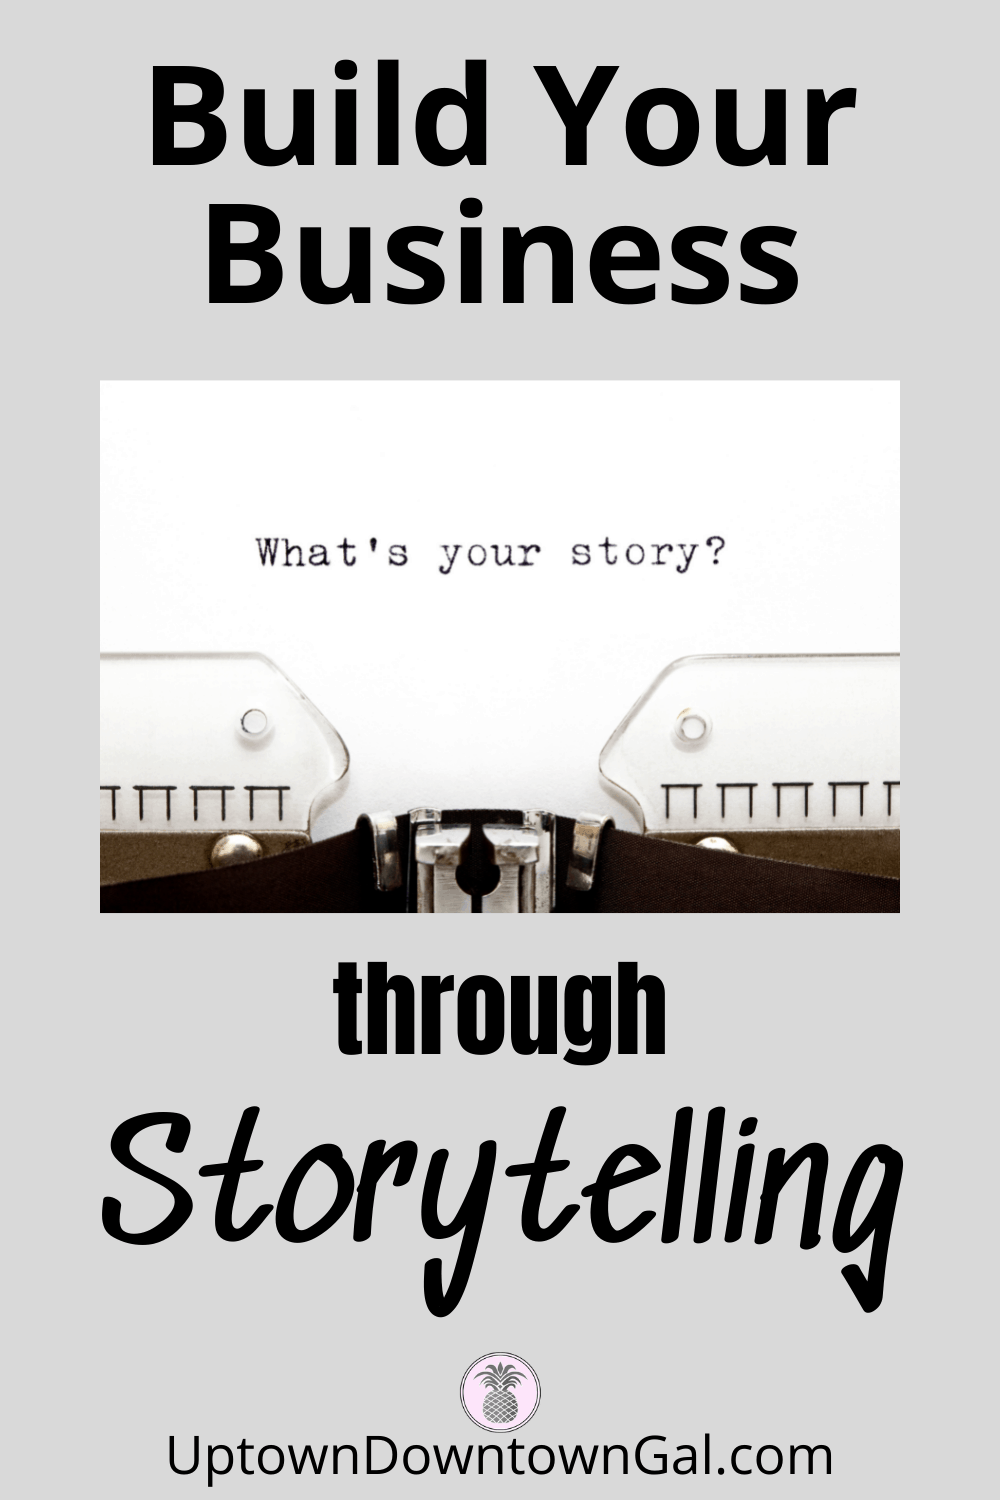 Storytelling-Will-Build-Your-Business-5